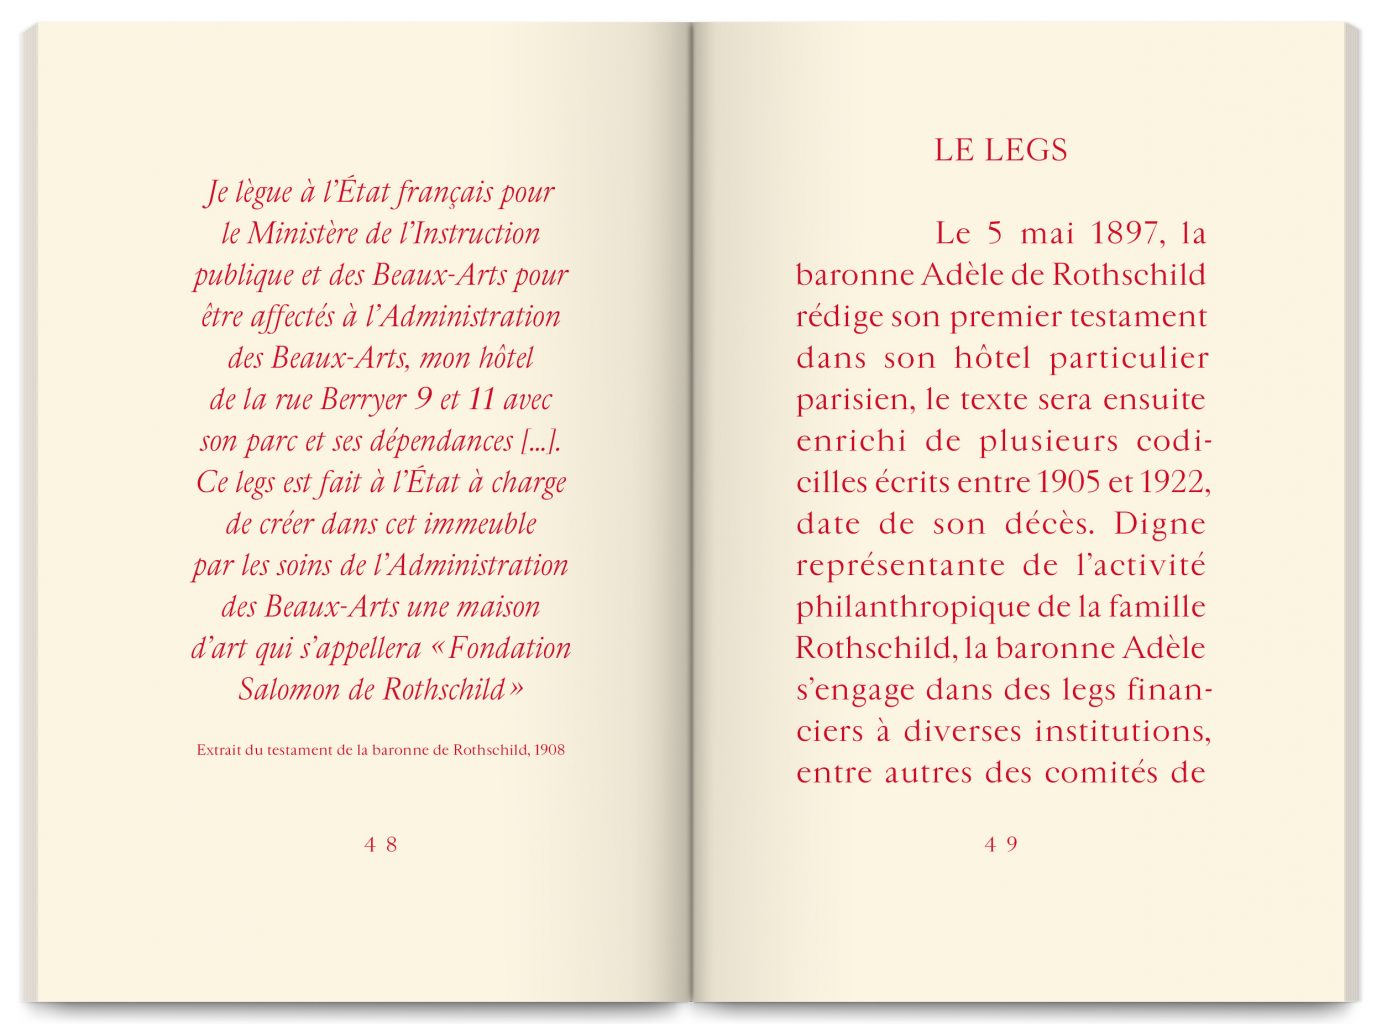 Publication Cabinet de curiosités – Hôtel Salomon de Rothschild, published by FNAGP, designed by In the shade of a tree studio, founded by Sophie Demay and Maël Fournier Comte.